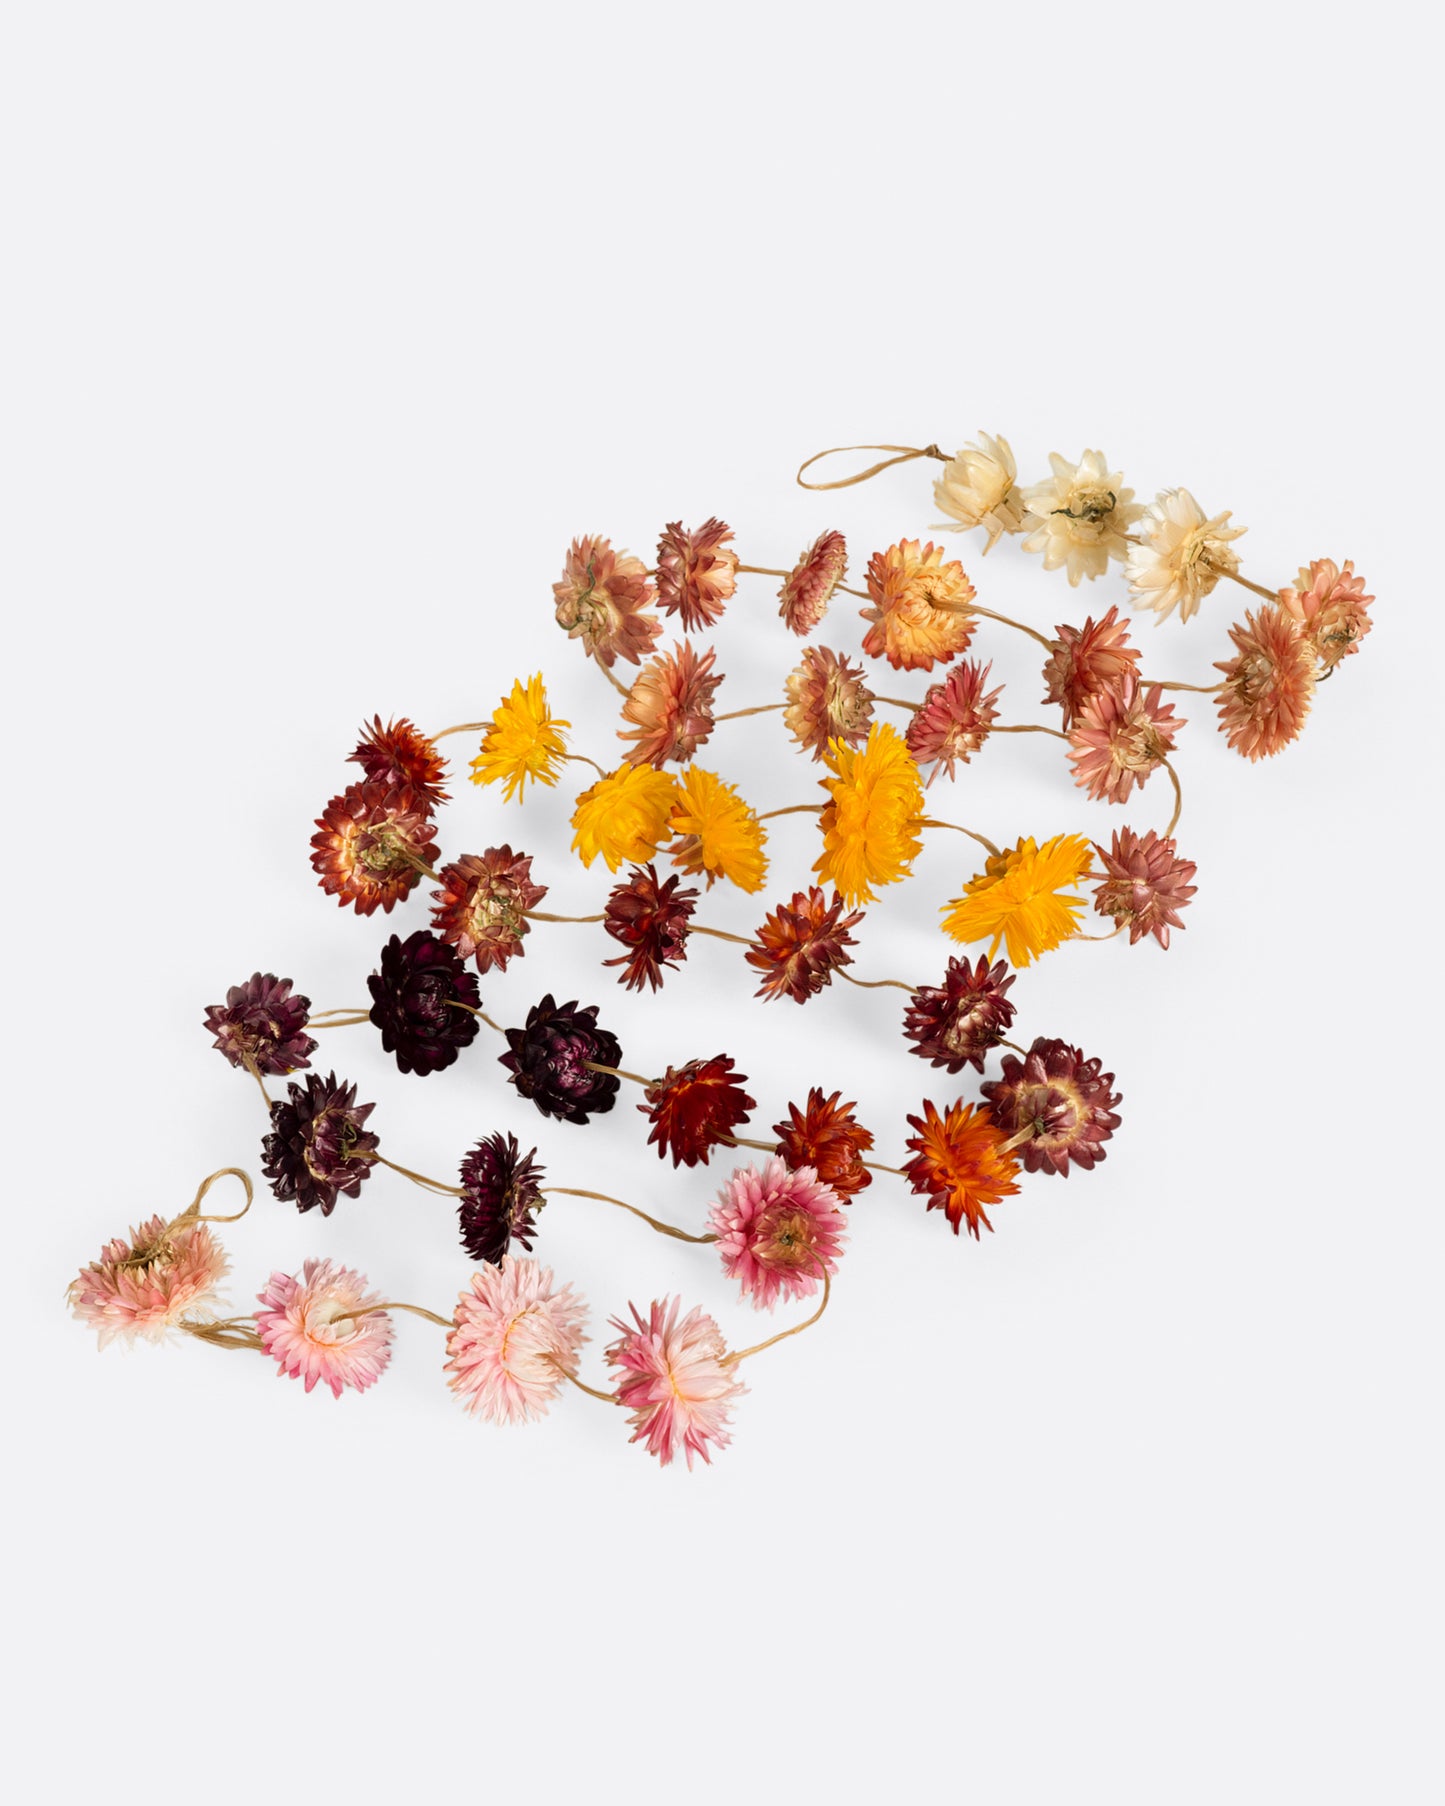 These garlands are hand strung and knotted with homegrown strawflowers, sure to brighten any space.